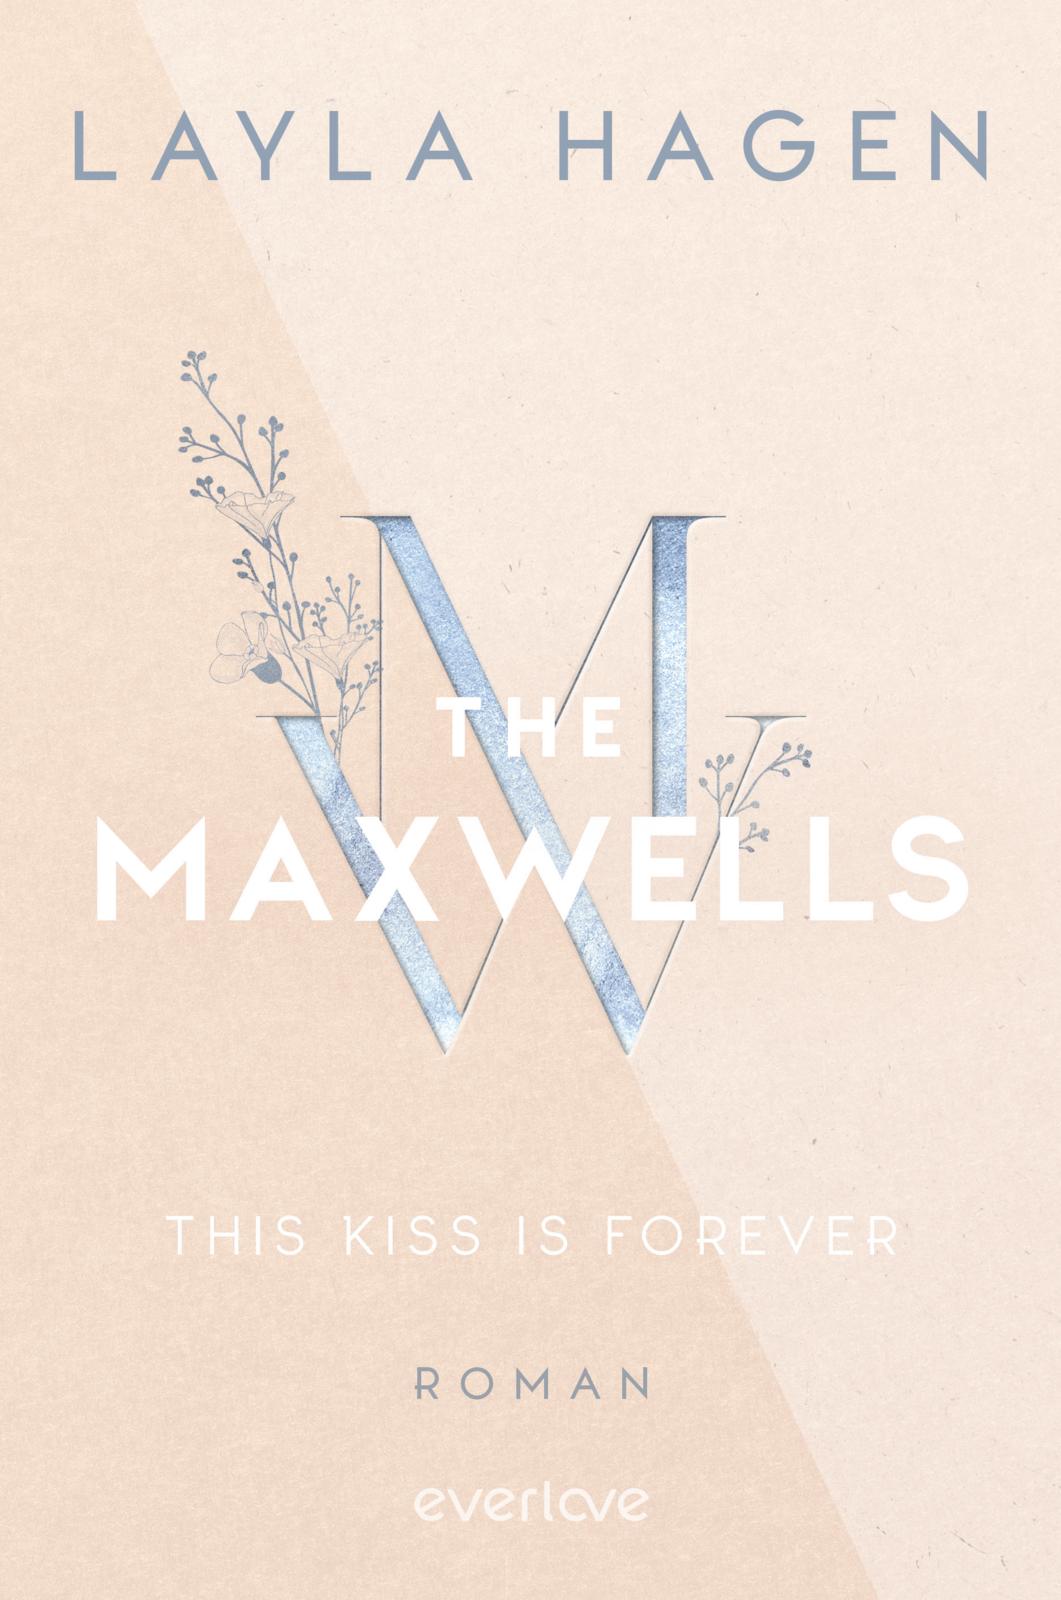 Hagen L - The Maxwells - This kiss is forever